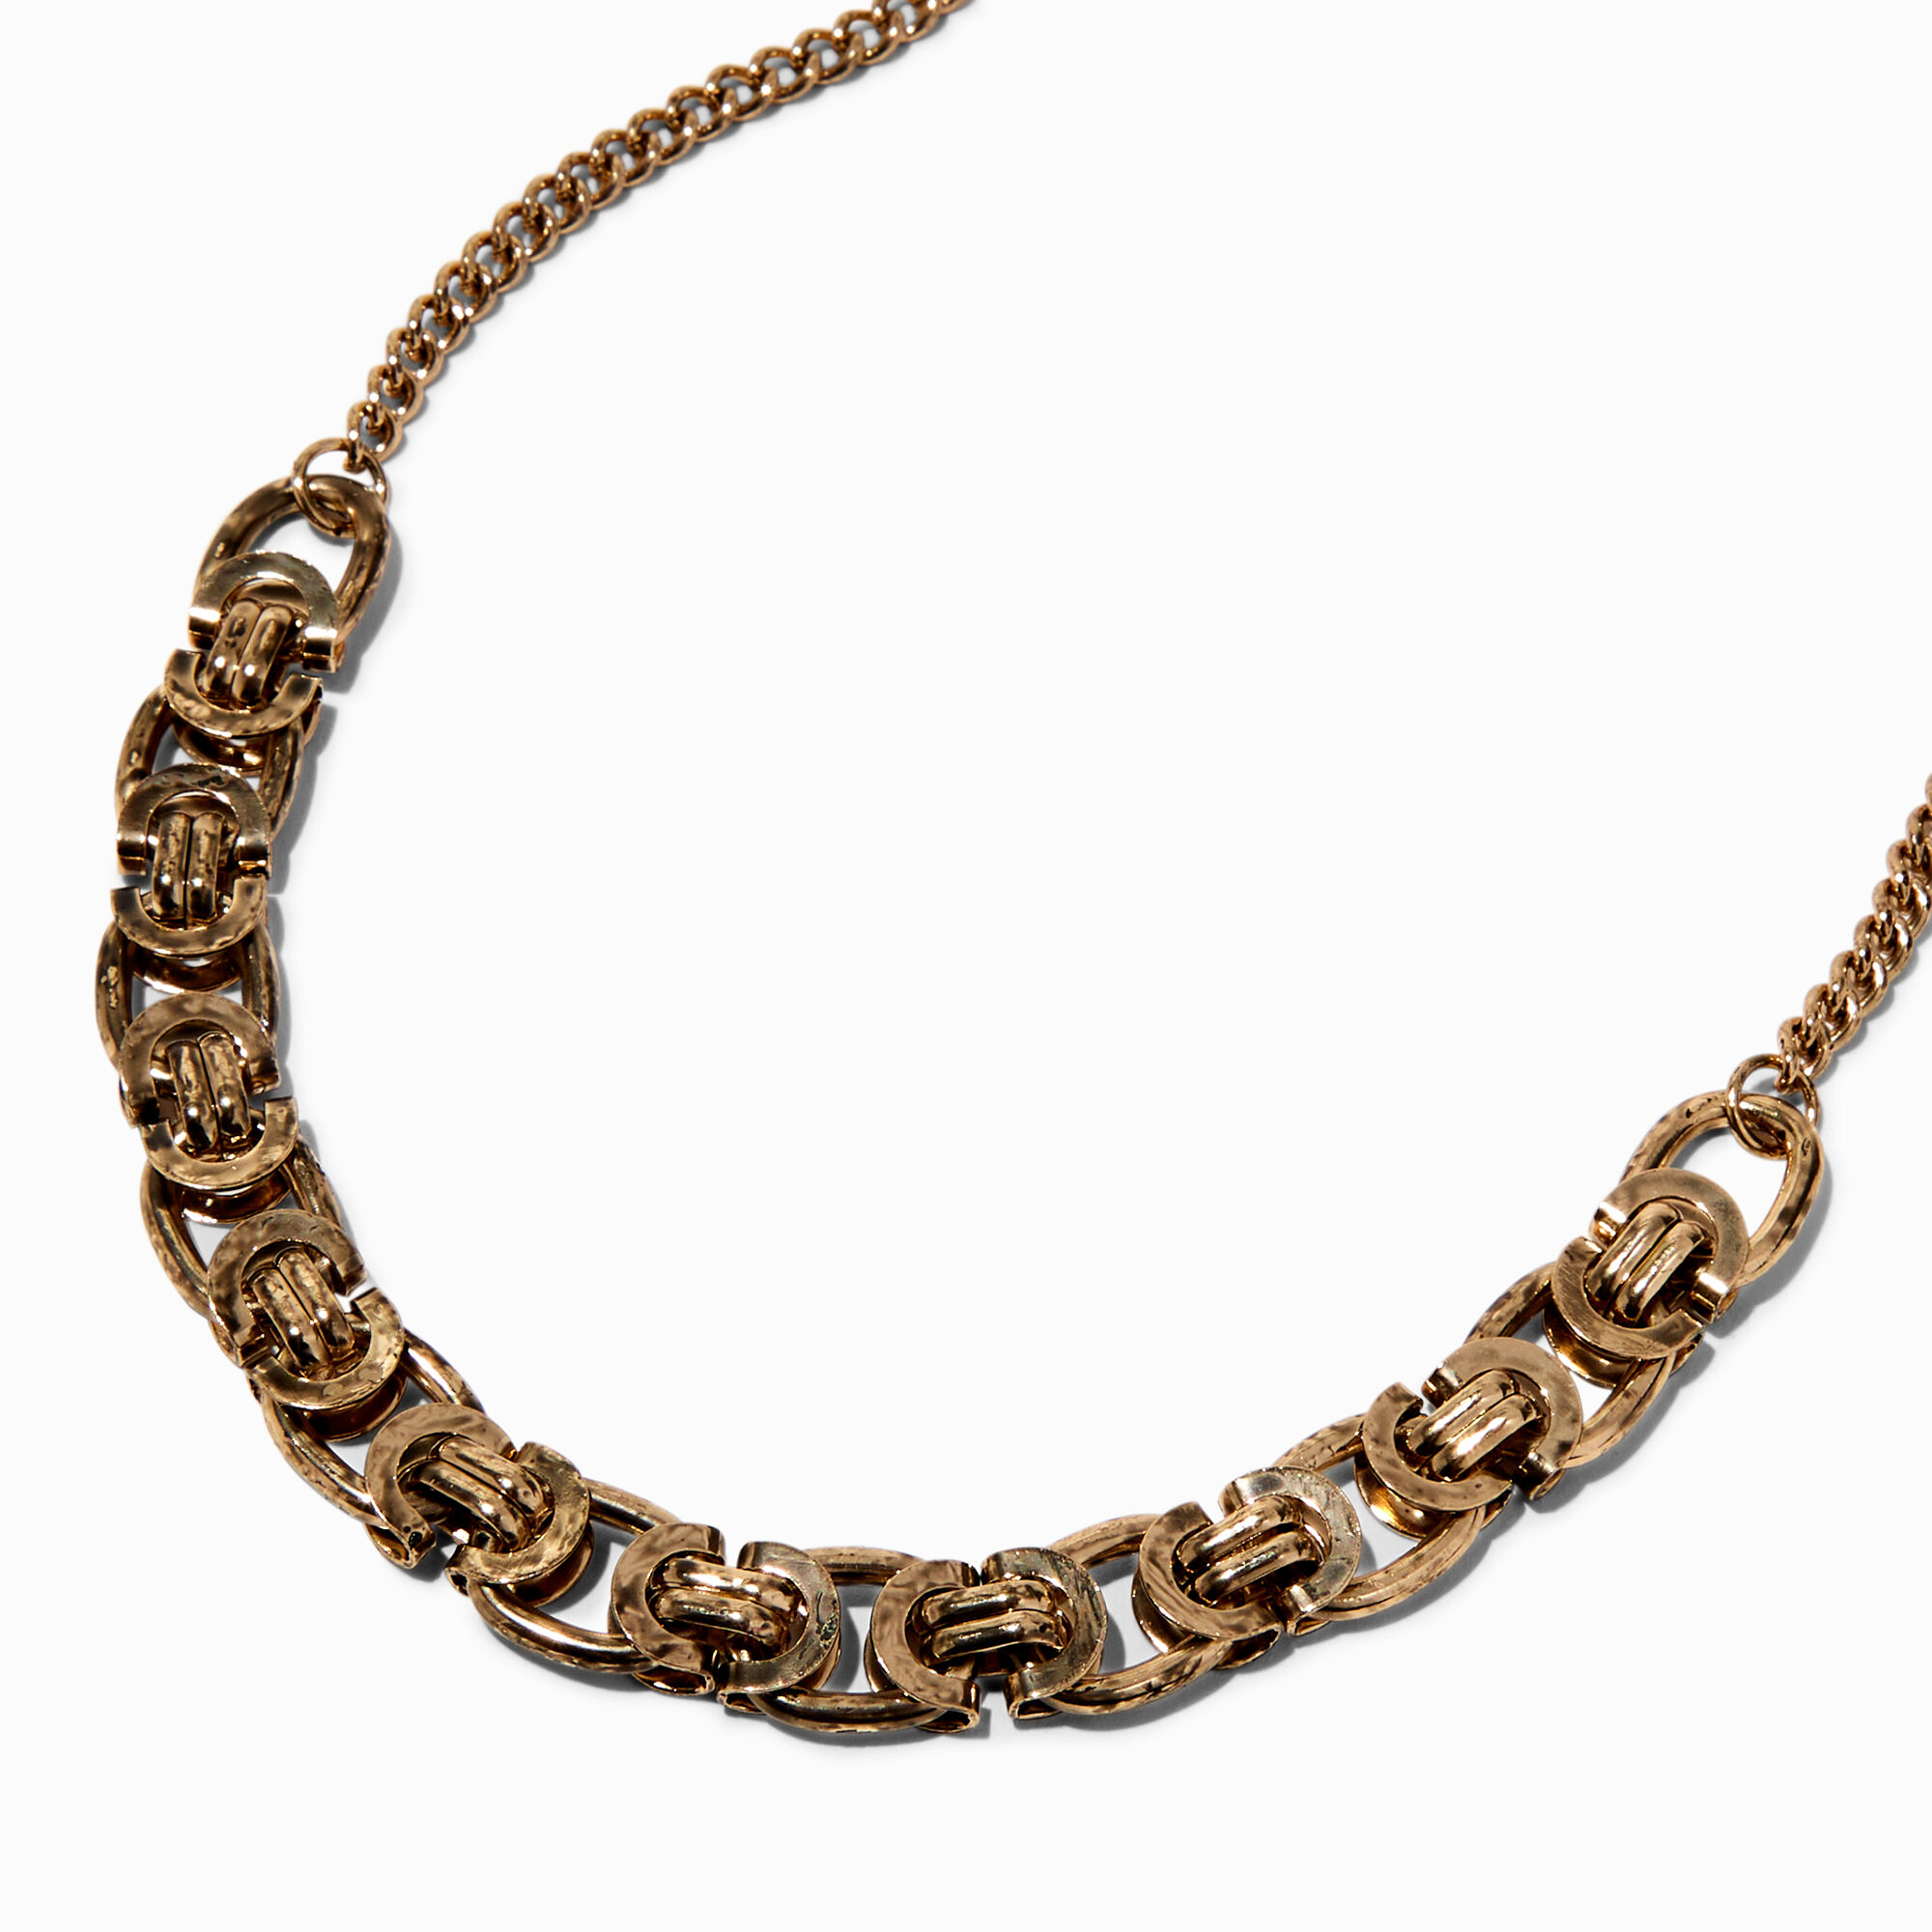 View Claires Antiqued Tone Link Chain Necklace Gold information